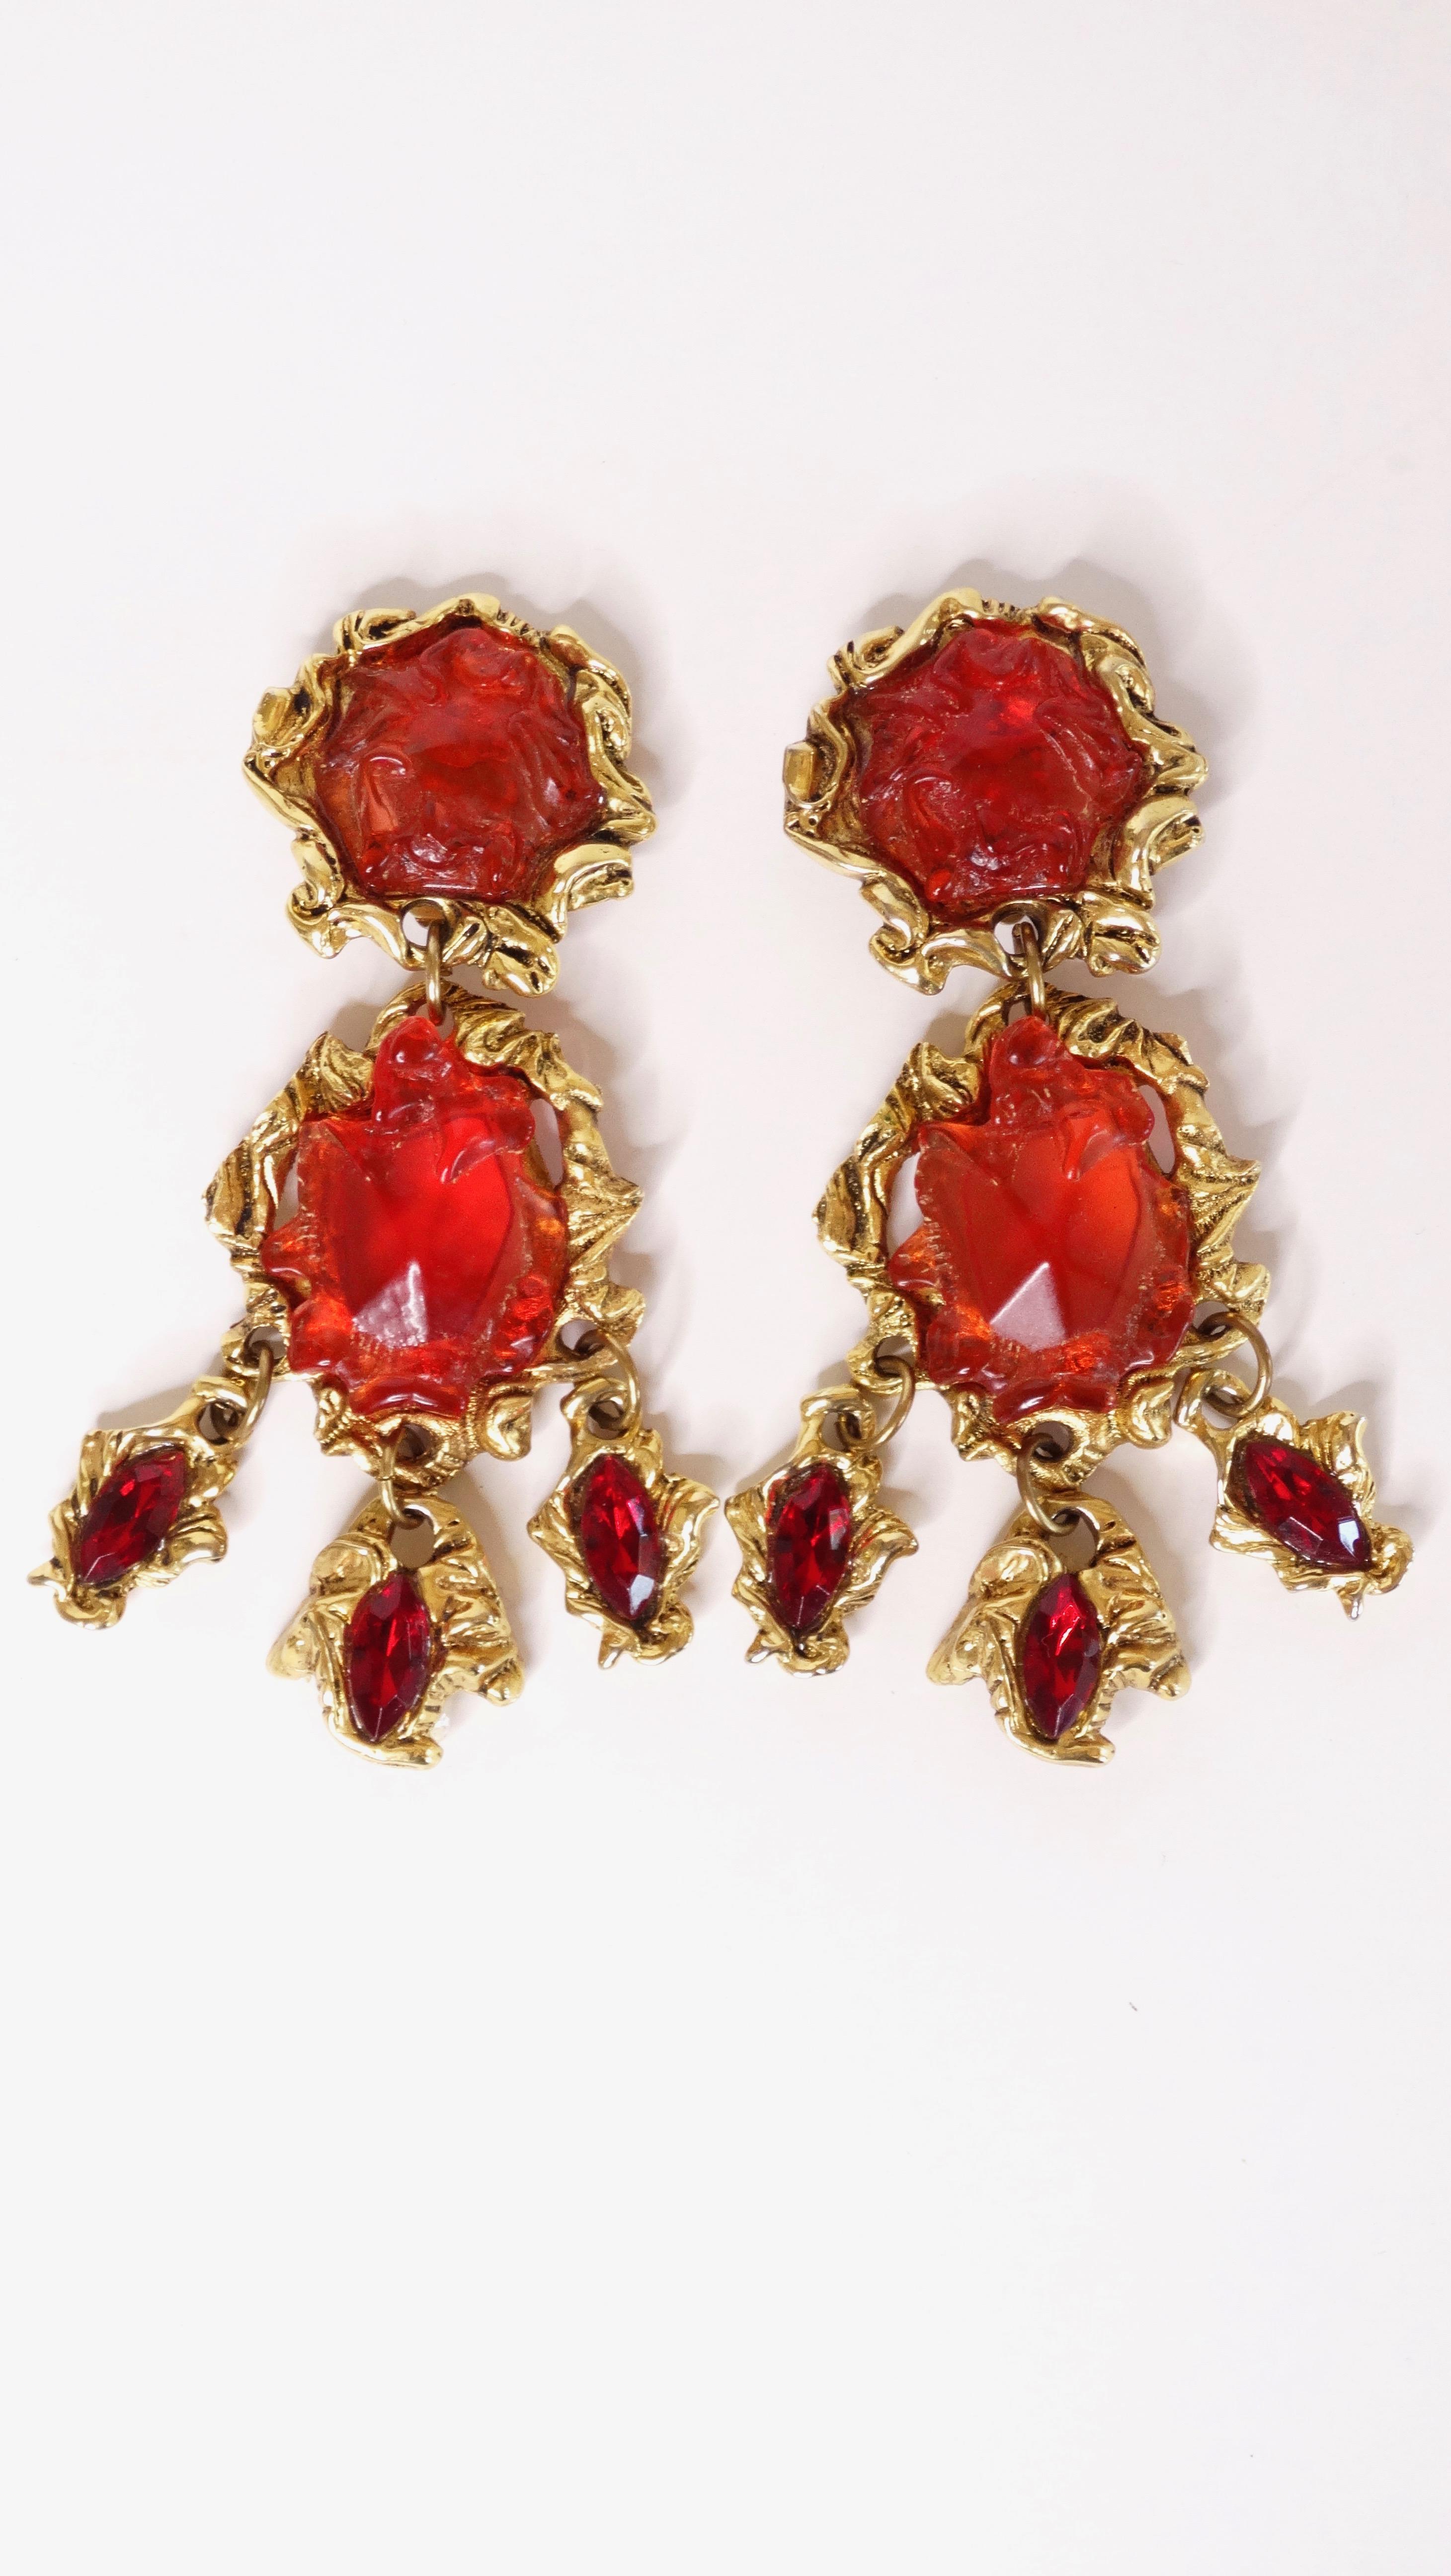 A fabulous 1980's Kalinger Paris couture runway earrings with the perfect hue of red! If you love a chunky/long earring and of course to make a statement, these are the earrings for you. Earrings are plated gold with resin crystal cut gems.